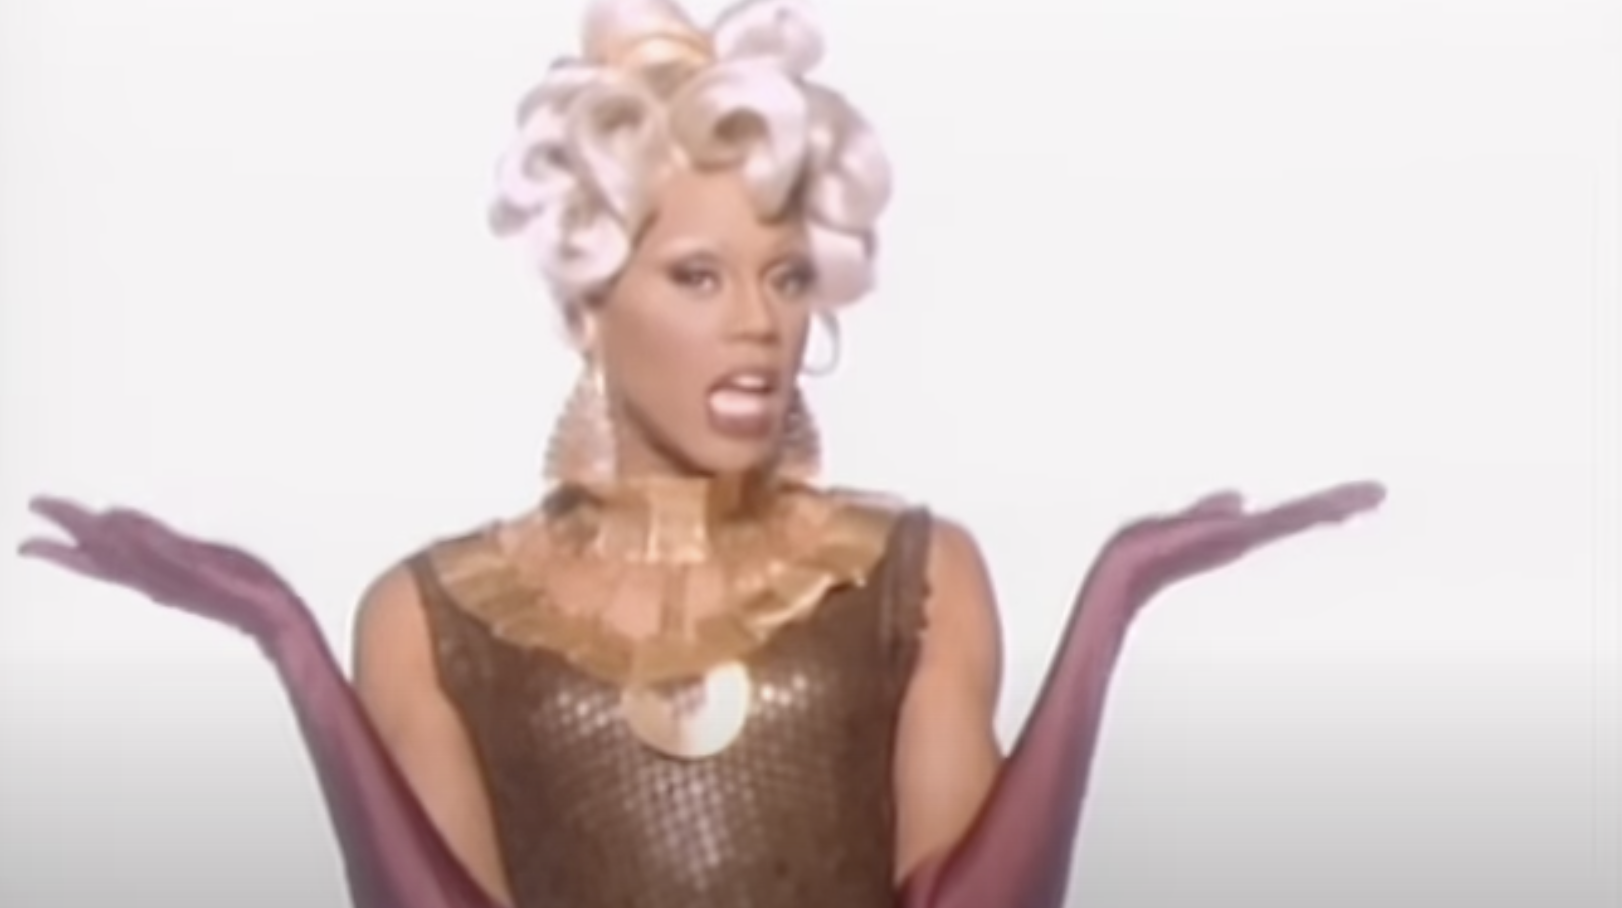 RuPaul poses with an expressive gesture, wearing a sequined outfit, gold accessories, and curly hair styled upwards